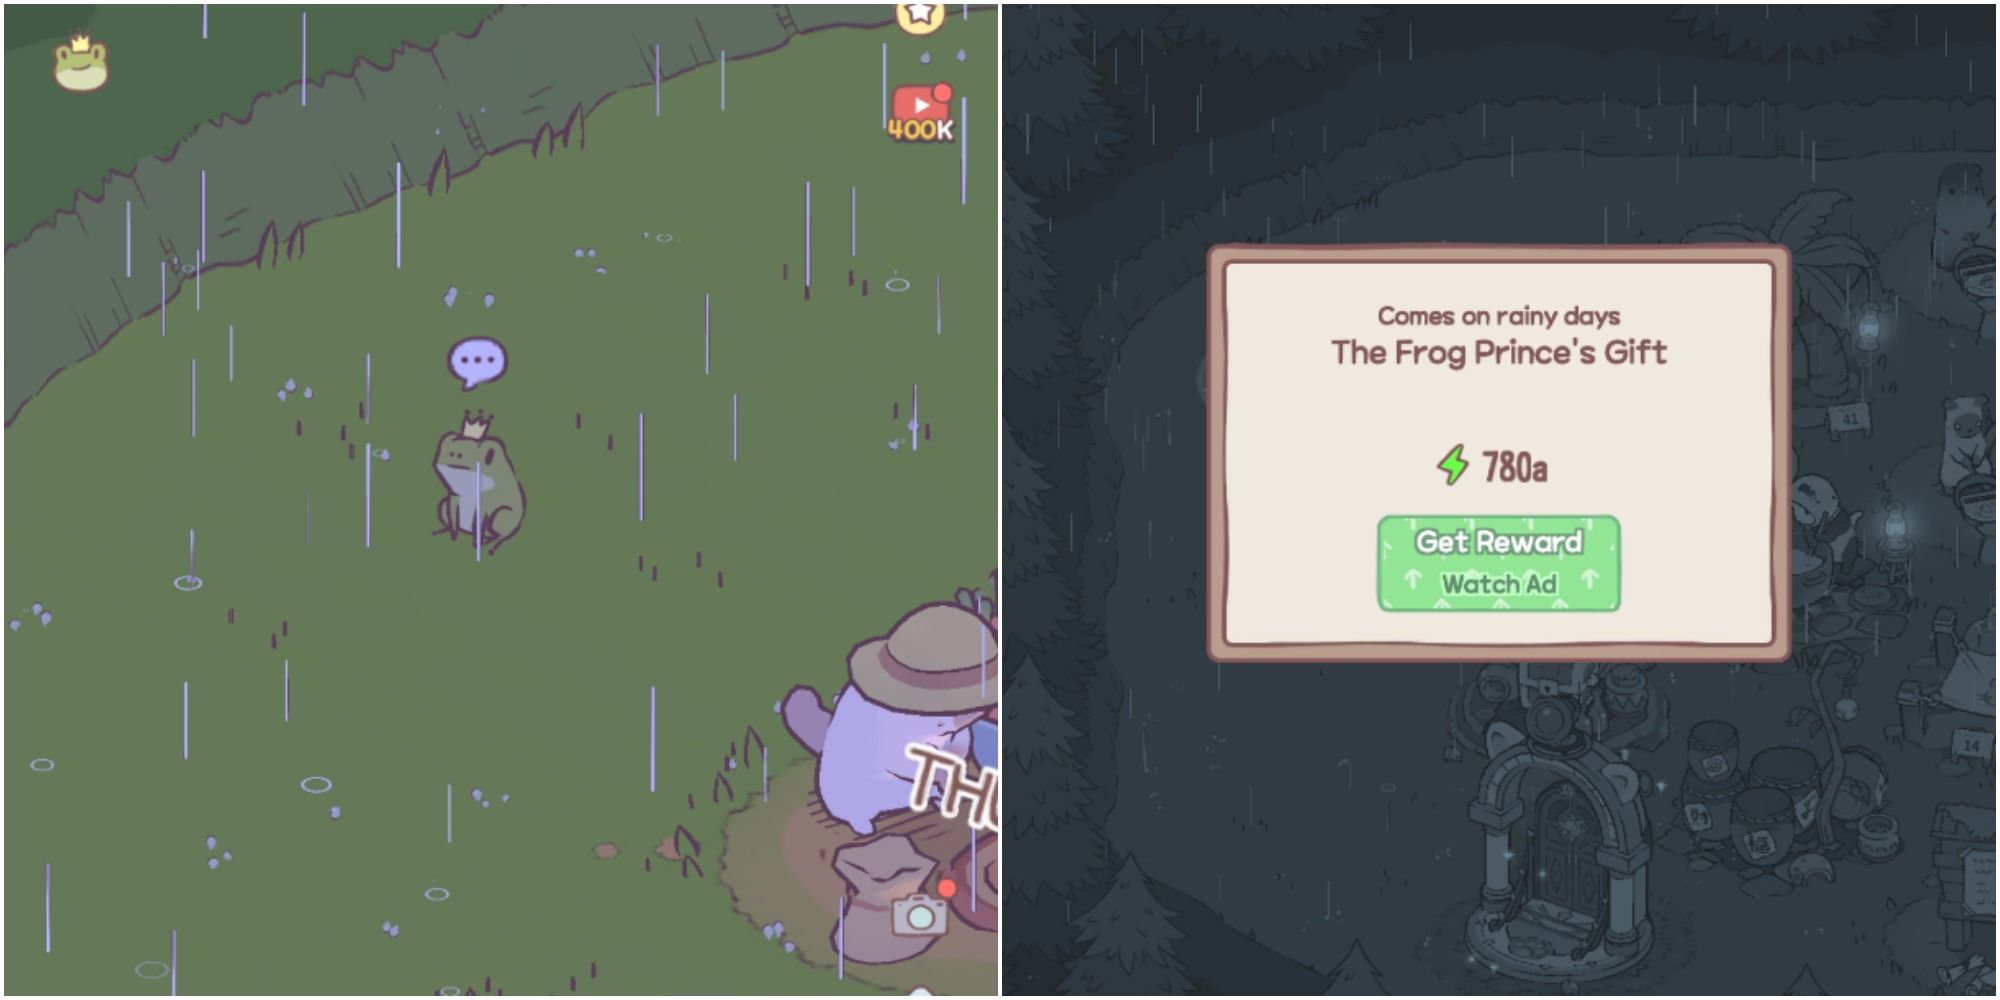 Split image of Frog Prince in the rain and a menu with Frog Prince's gfit